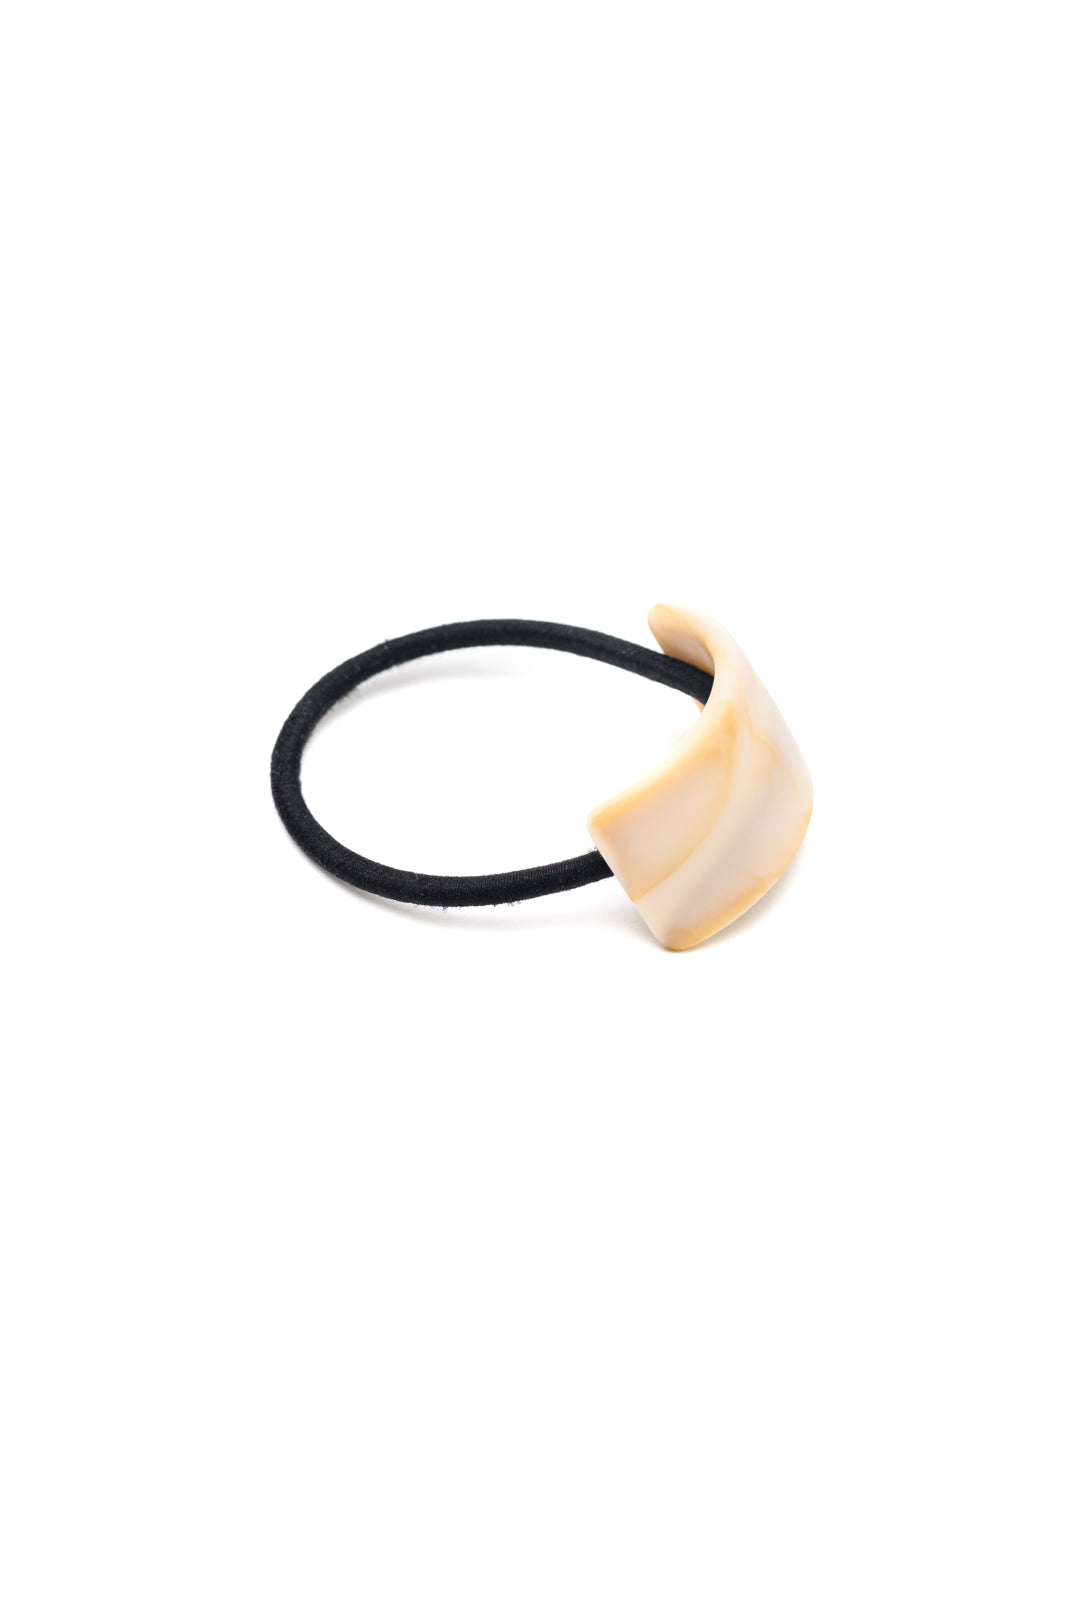 Rectangle Cuff Hair Tie Elastic in Ivory - WEBSITE EXCLUSIVE